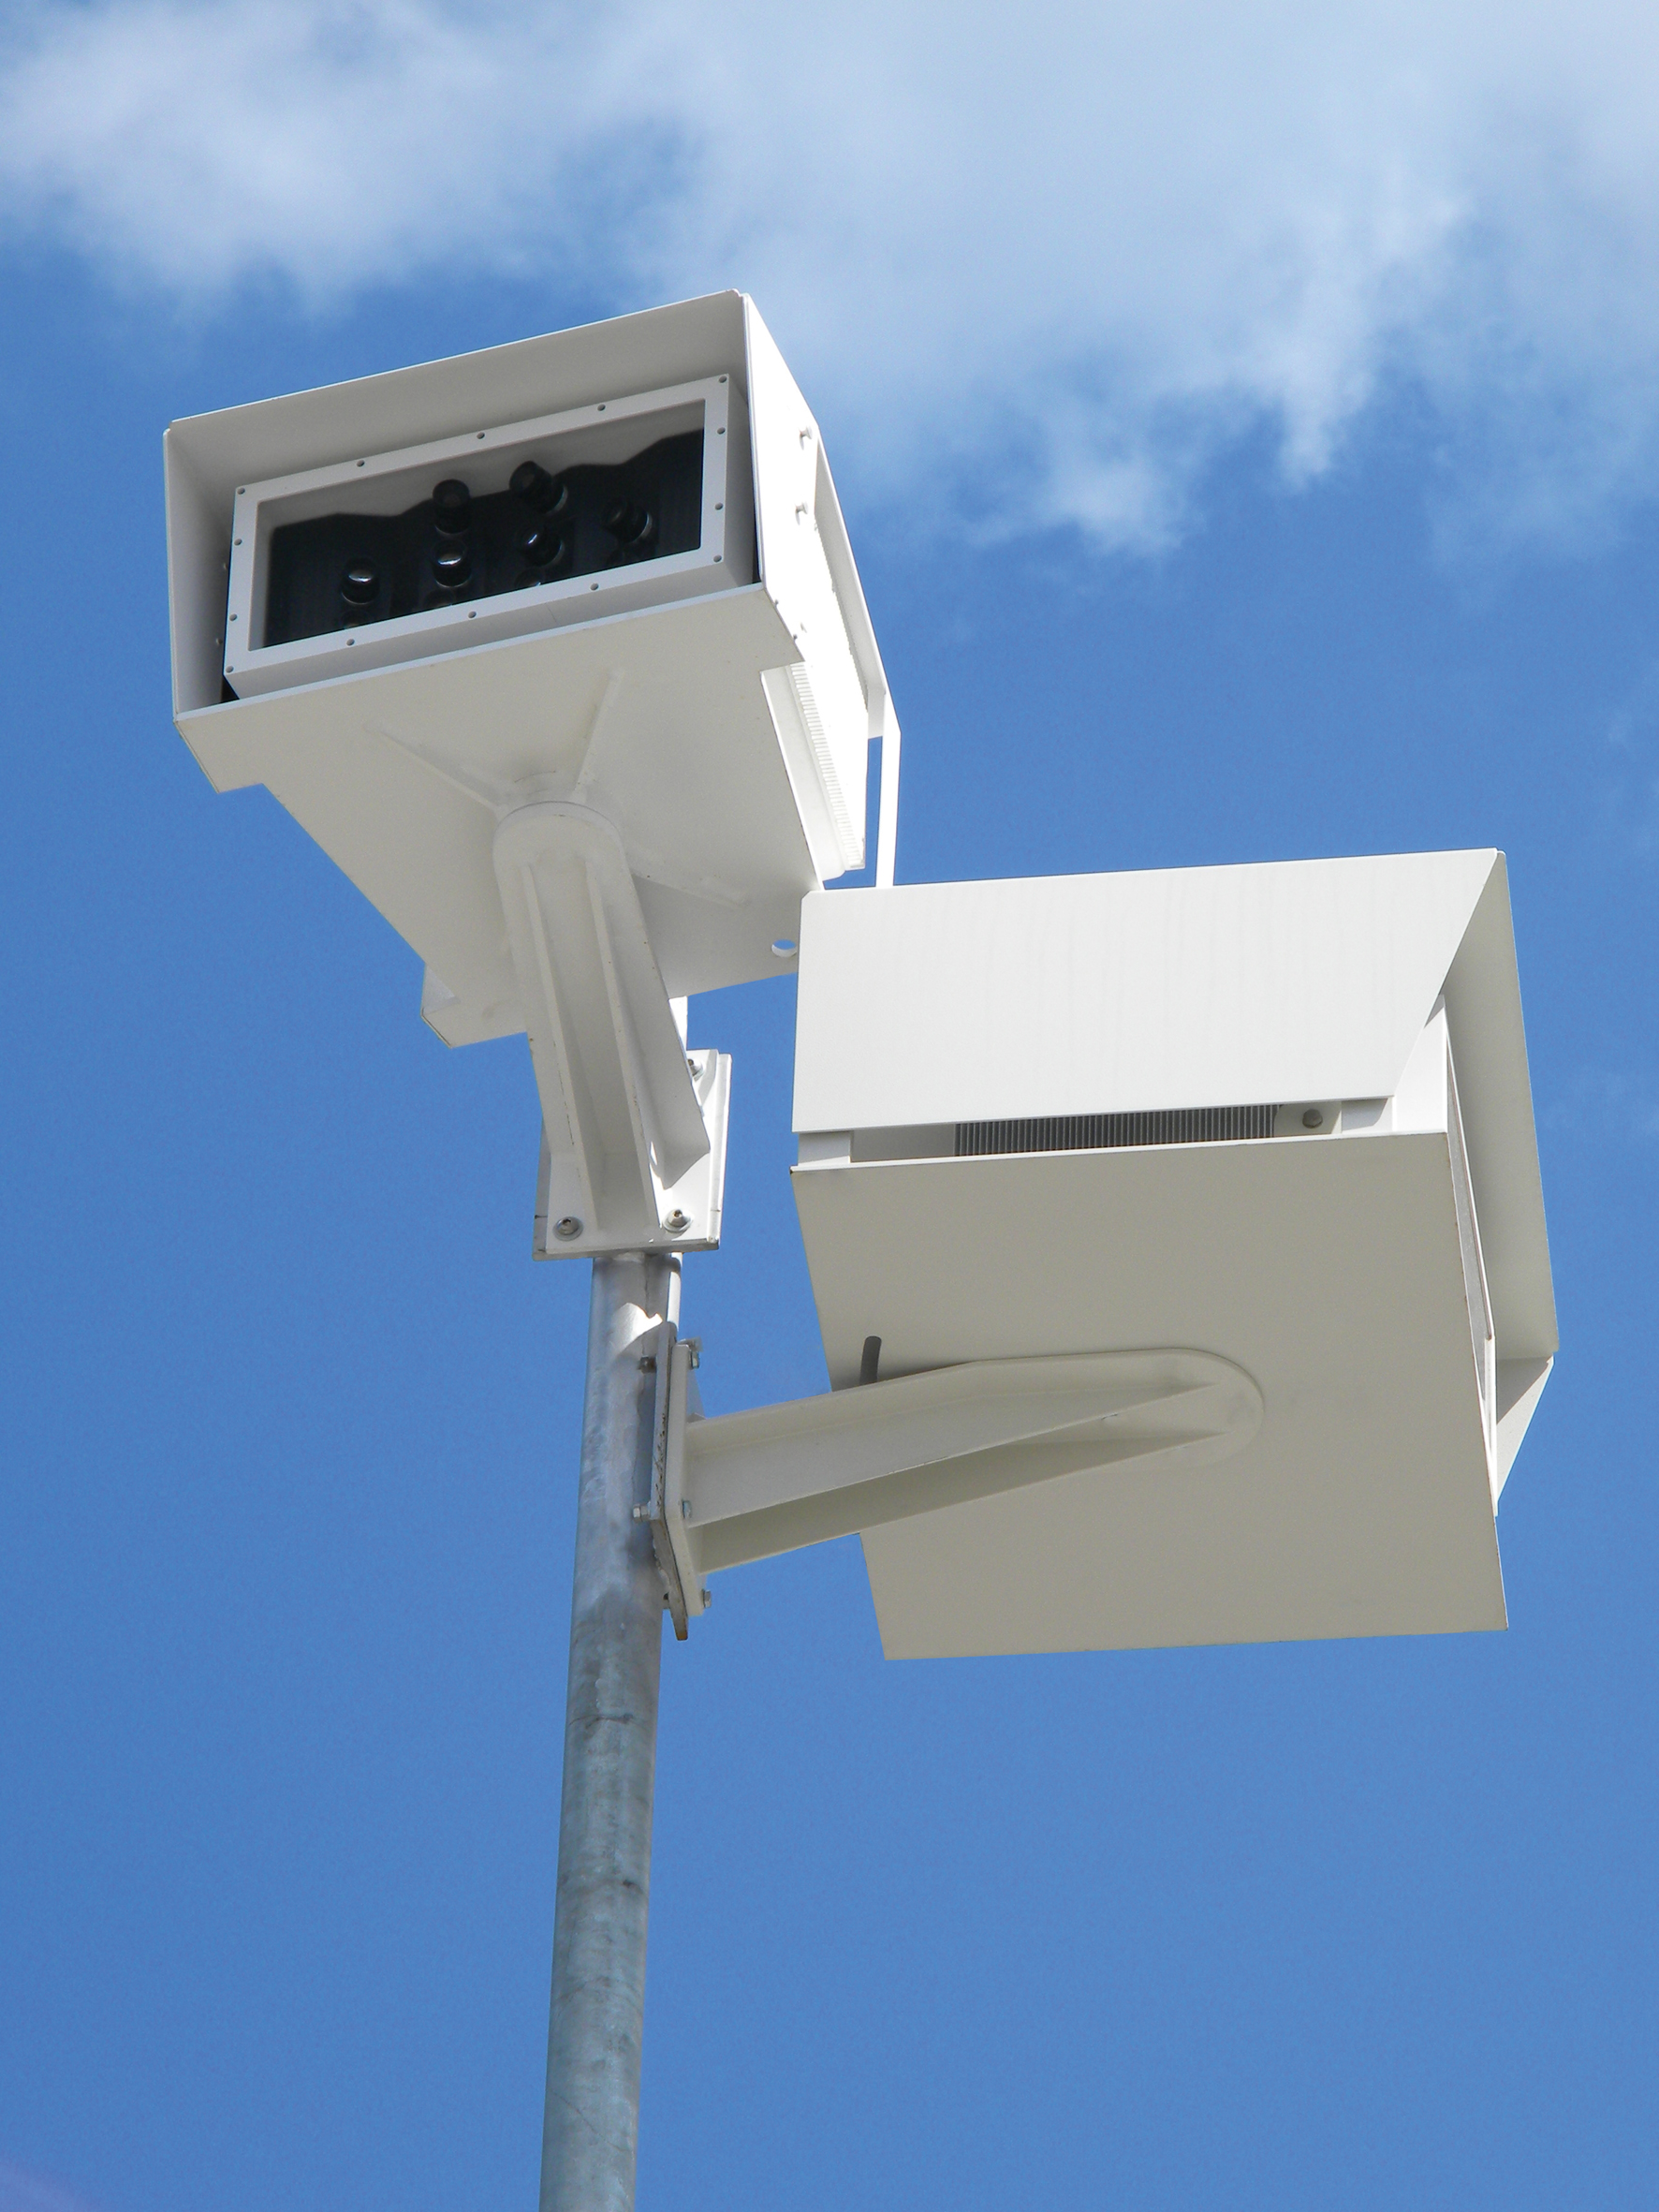 Airport Network-Based Video Surveillance Solutions